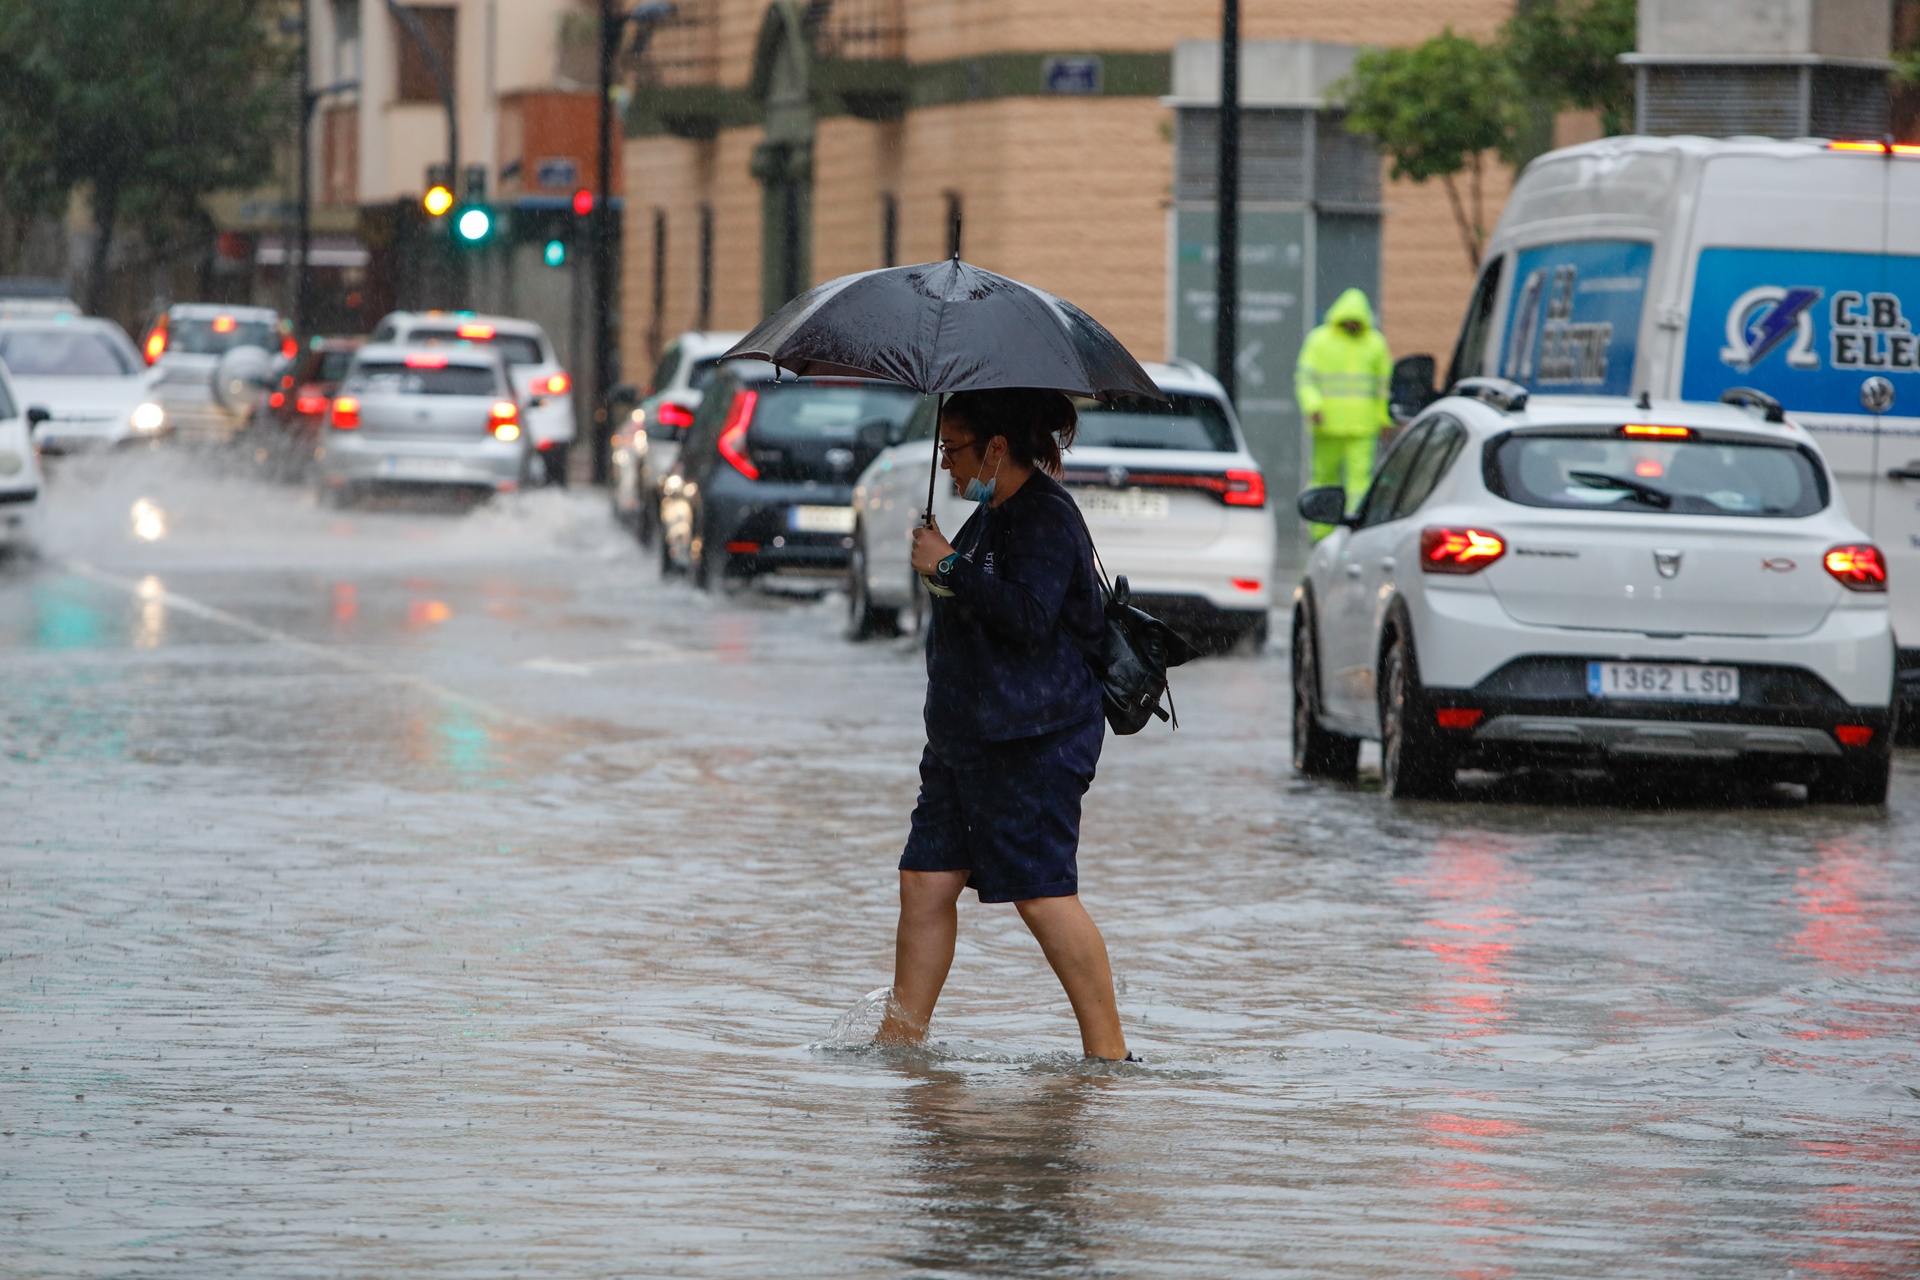 Ibiza Is Suffering Traffic Jams, Flooding, And Overflowing Sewers As A Result Of The Storm